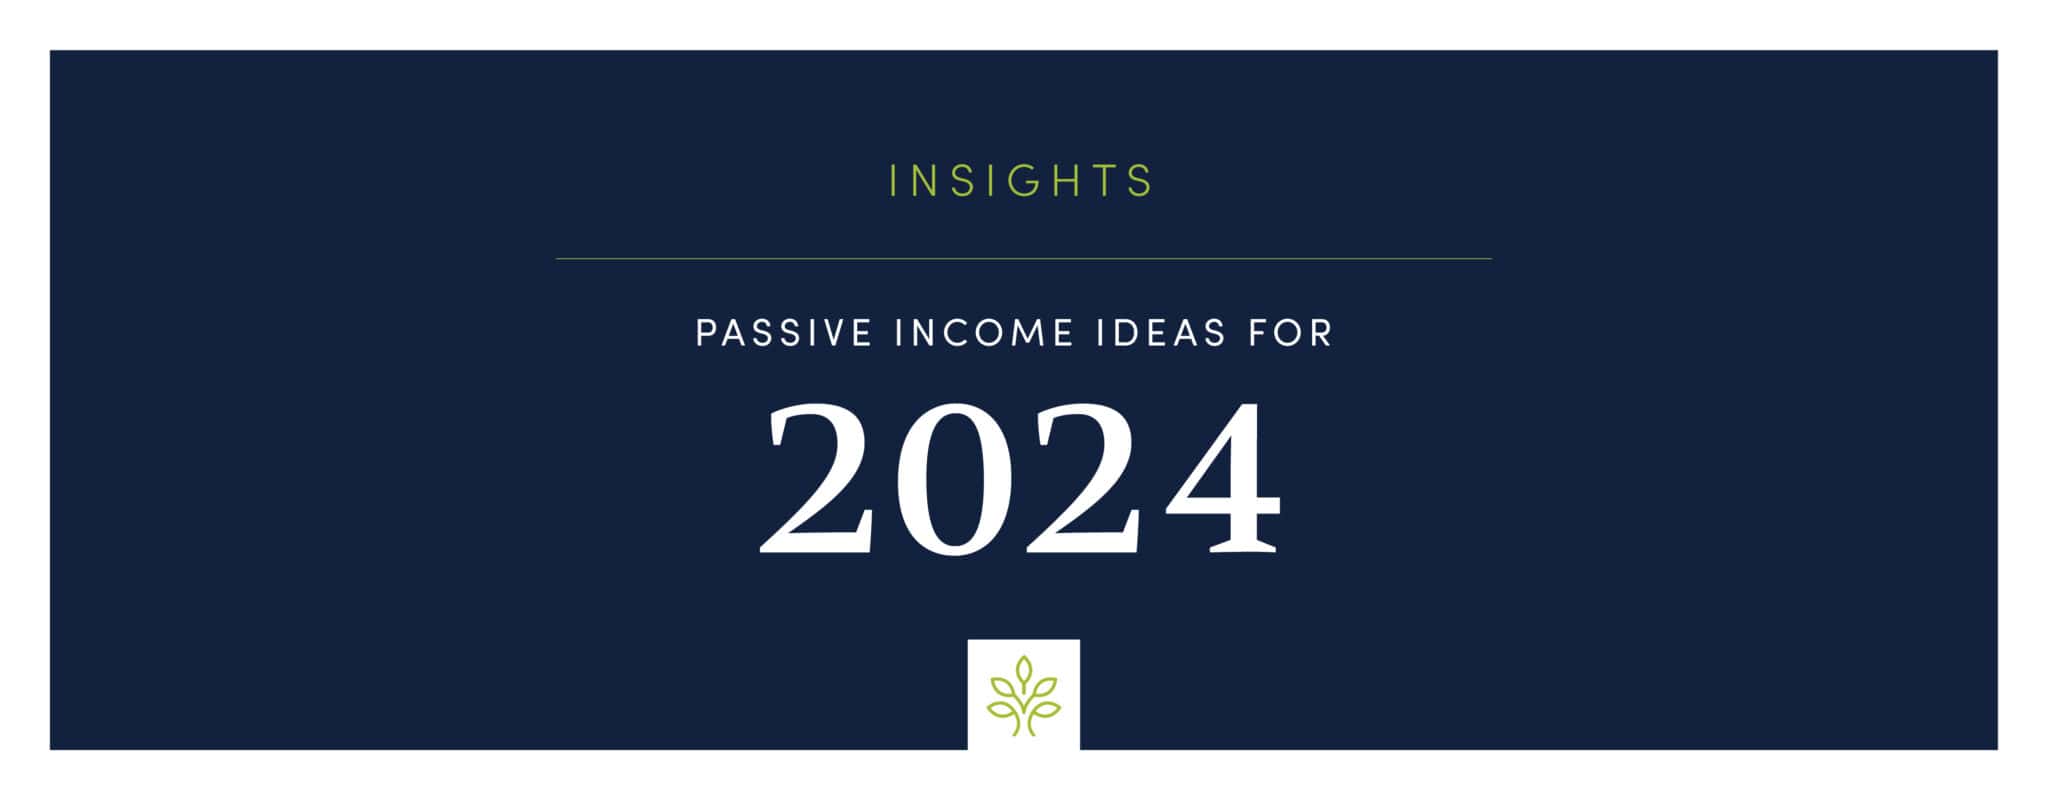 Passive Ideas for 2024 GladePark Investments